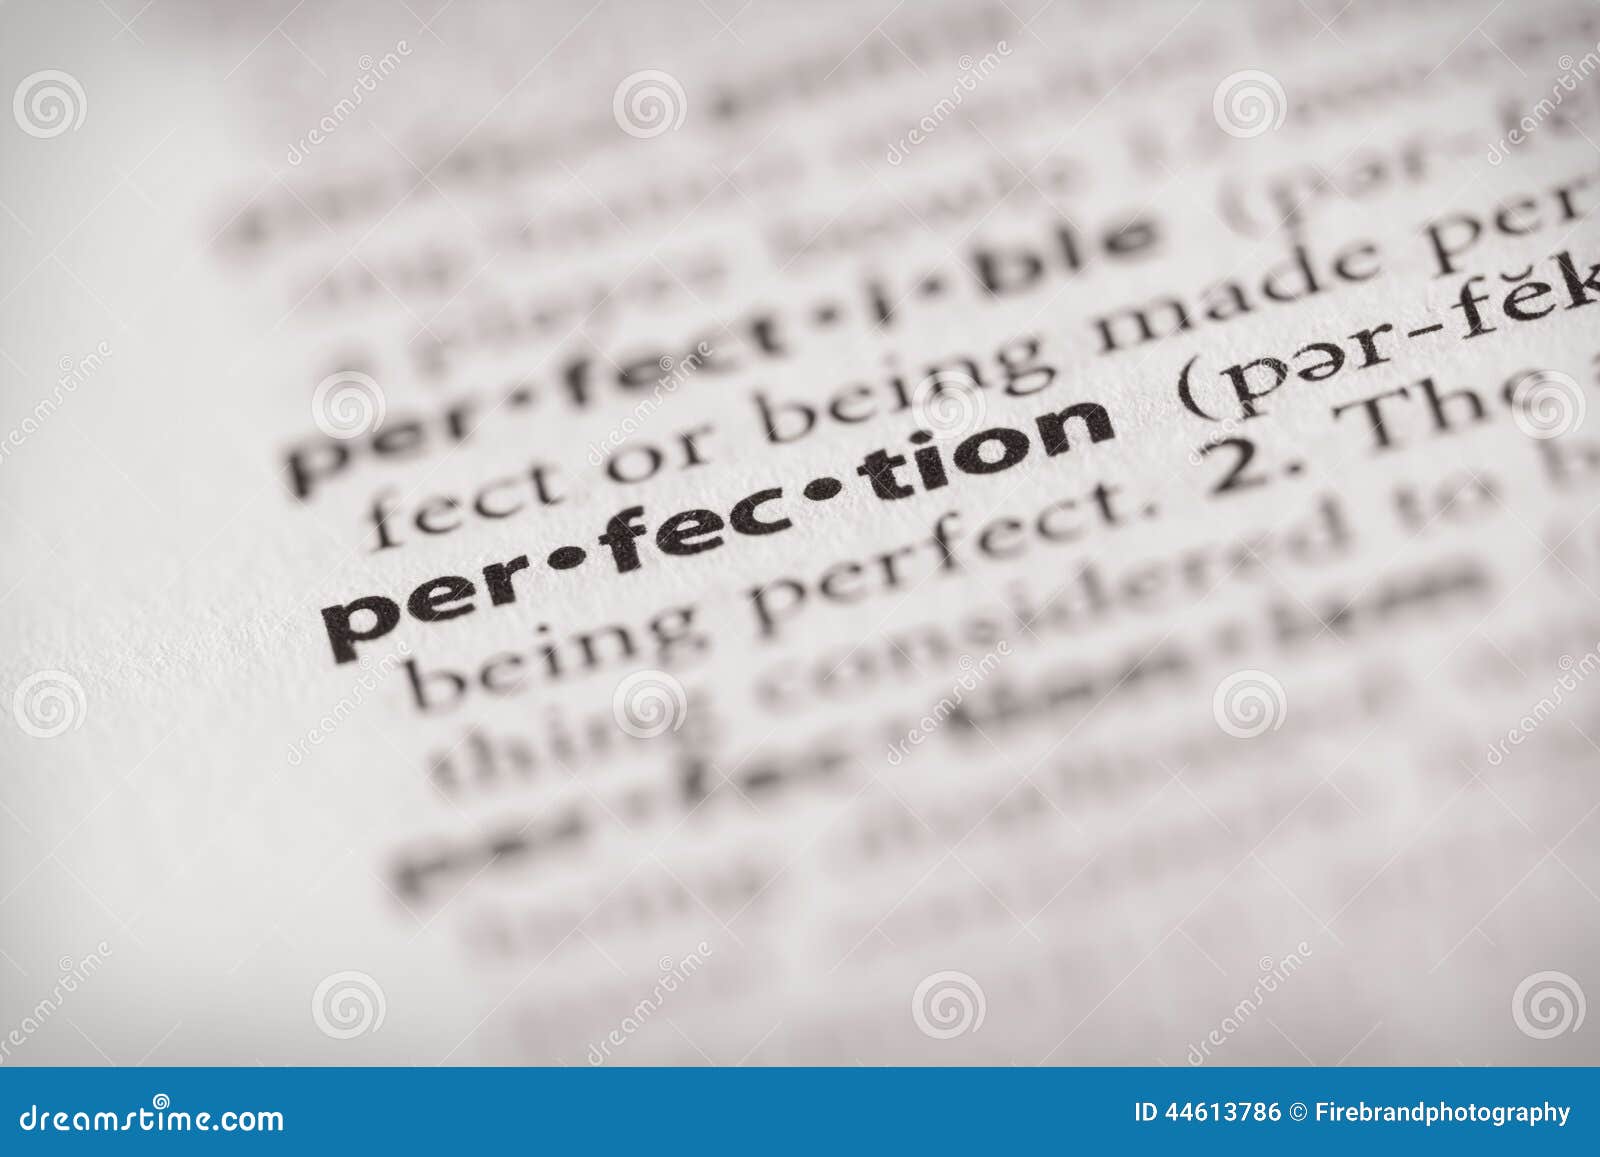 dictionary series - attributes: perfection